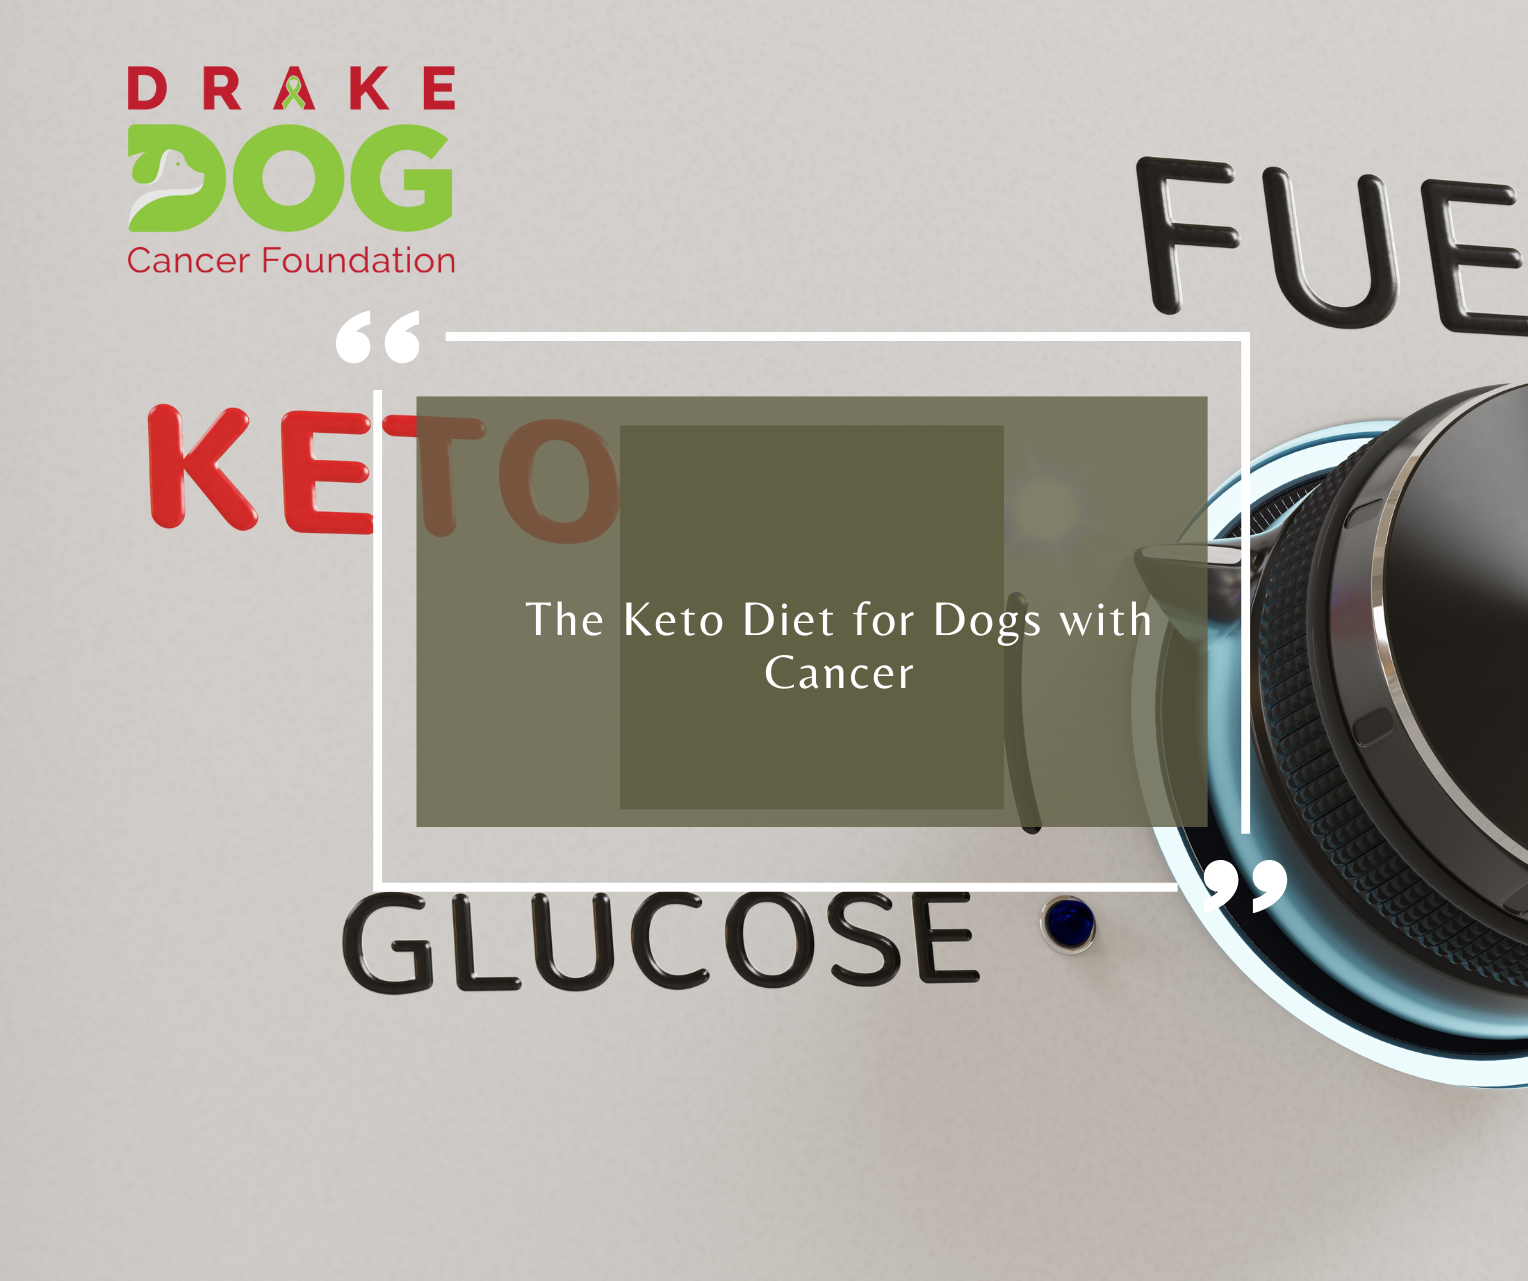 The Keto Diet for Dogs with Cancer